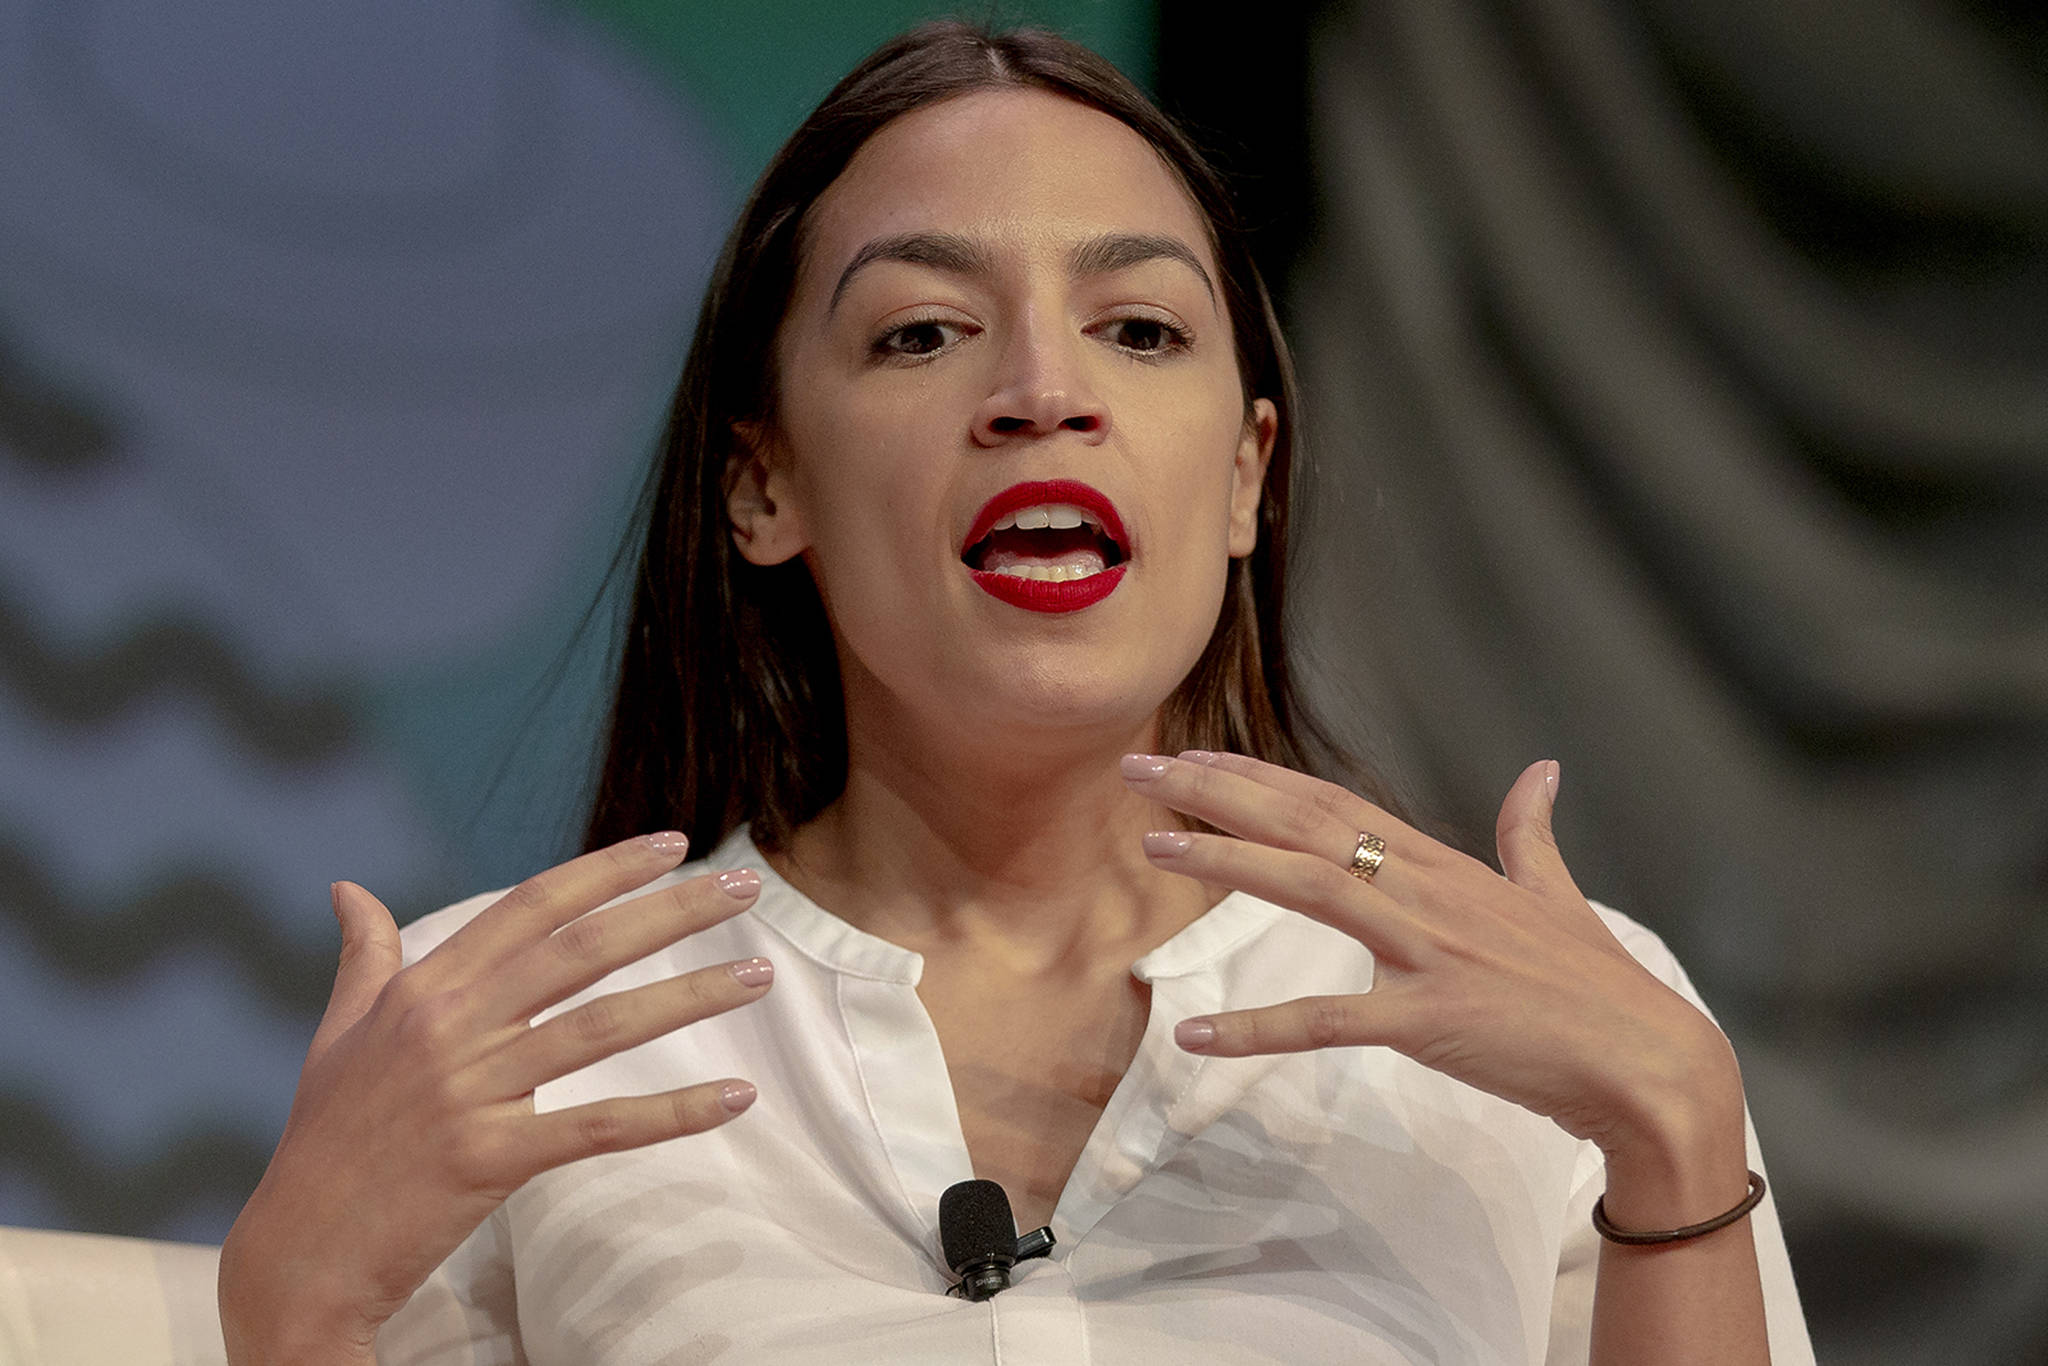 Rep. Alexandria Ocasio-Cortez, D-New York, speaks during South by Southwest on Saturday, March 9, 2019, in Austin, Texas. (Nick Wagner | Austin American-Statesman)